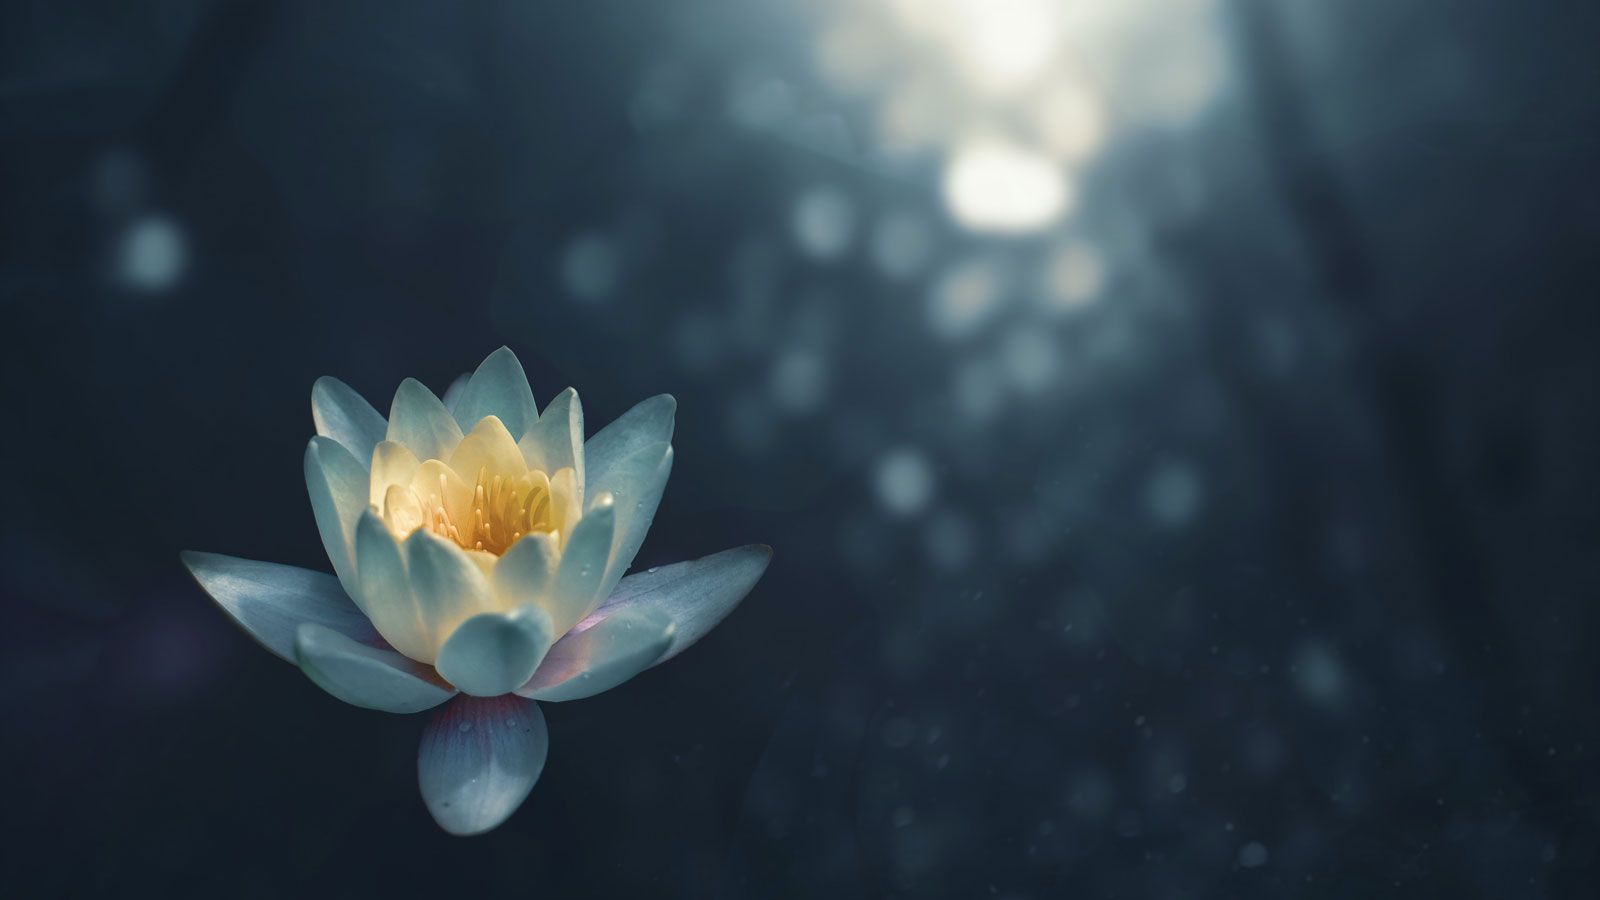 photo of a lotus flower in ray of sunlight.